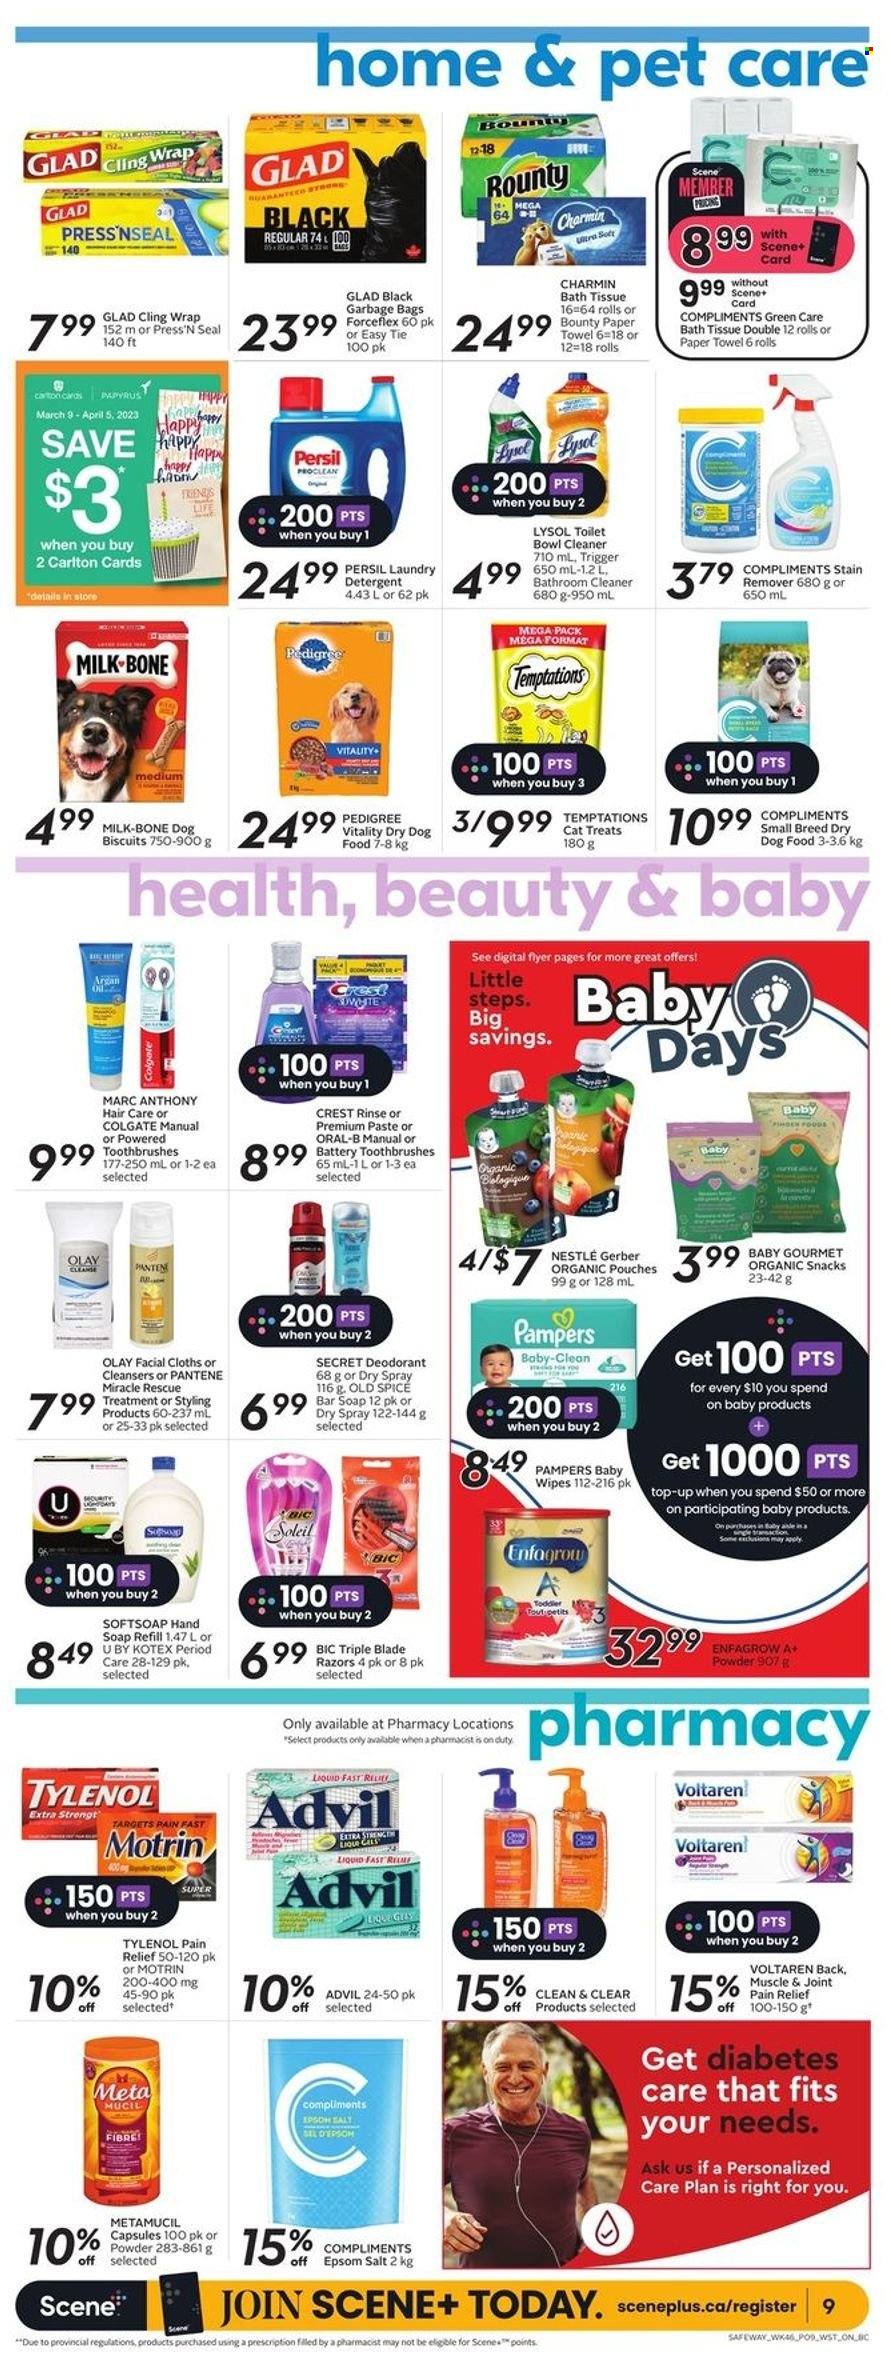 thumbnail - Safeway Flyer - March 16, 2023 - March 22, 2023 - Sales products - milk, snack, Bounty, Gerber, spice, wipes, Pampers, baby wipes, bath tissue, paper towels, Charmin, cleaner, stain remover, Lysol, Persil, laundry detergent, Softsoap, hand soap, soap bar, soap, Crest, Kotex, Olay, Clean & Clear, Pantene, anti-perspirant, BIC, animal food, animal treats, dog food, dog biscuits, Pedigree, dry dog food, pain relief, Tylenol, Advil Rapid, Metamucil, Motrin, detergent, Colgate, Nestlé, Old Spice, Oral-B, deodorant. Page 14.